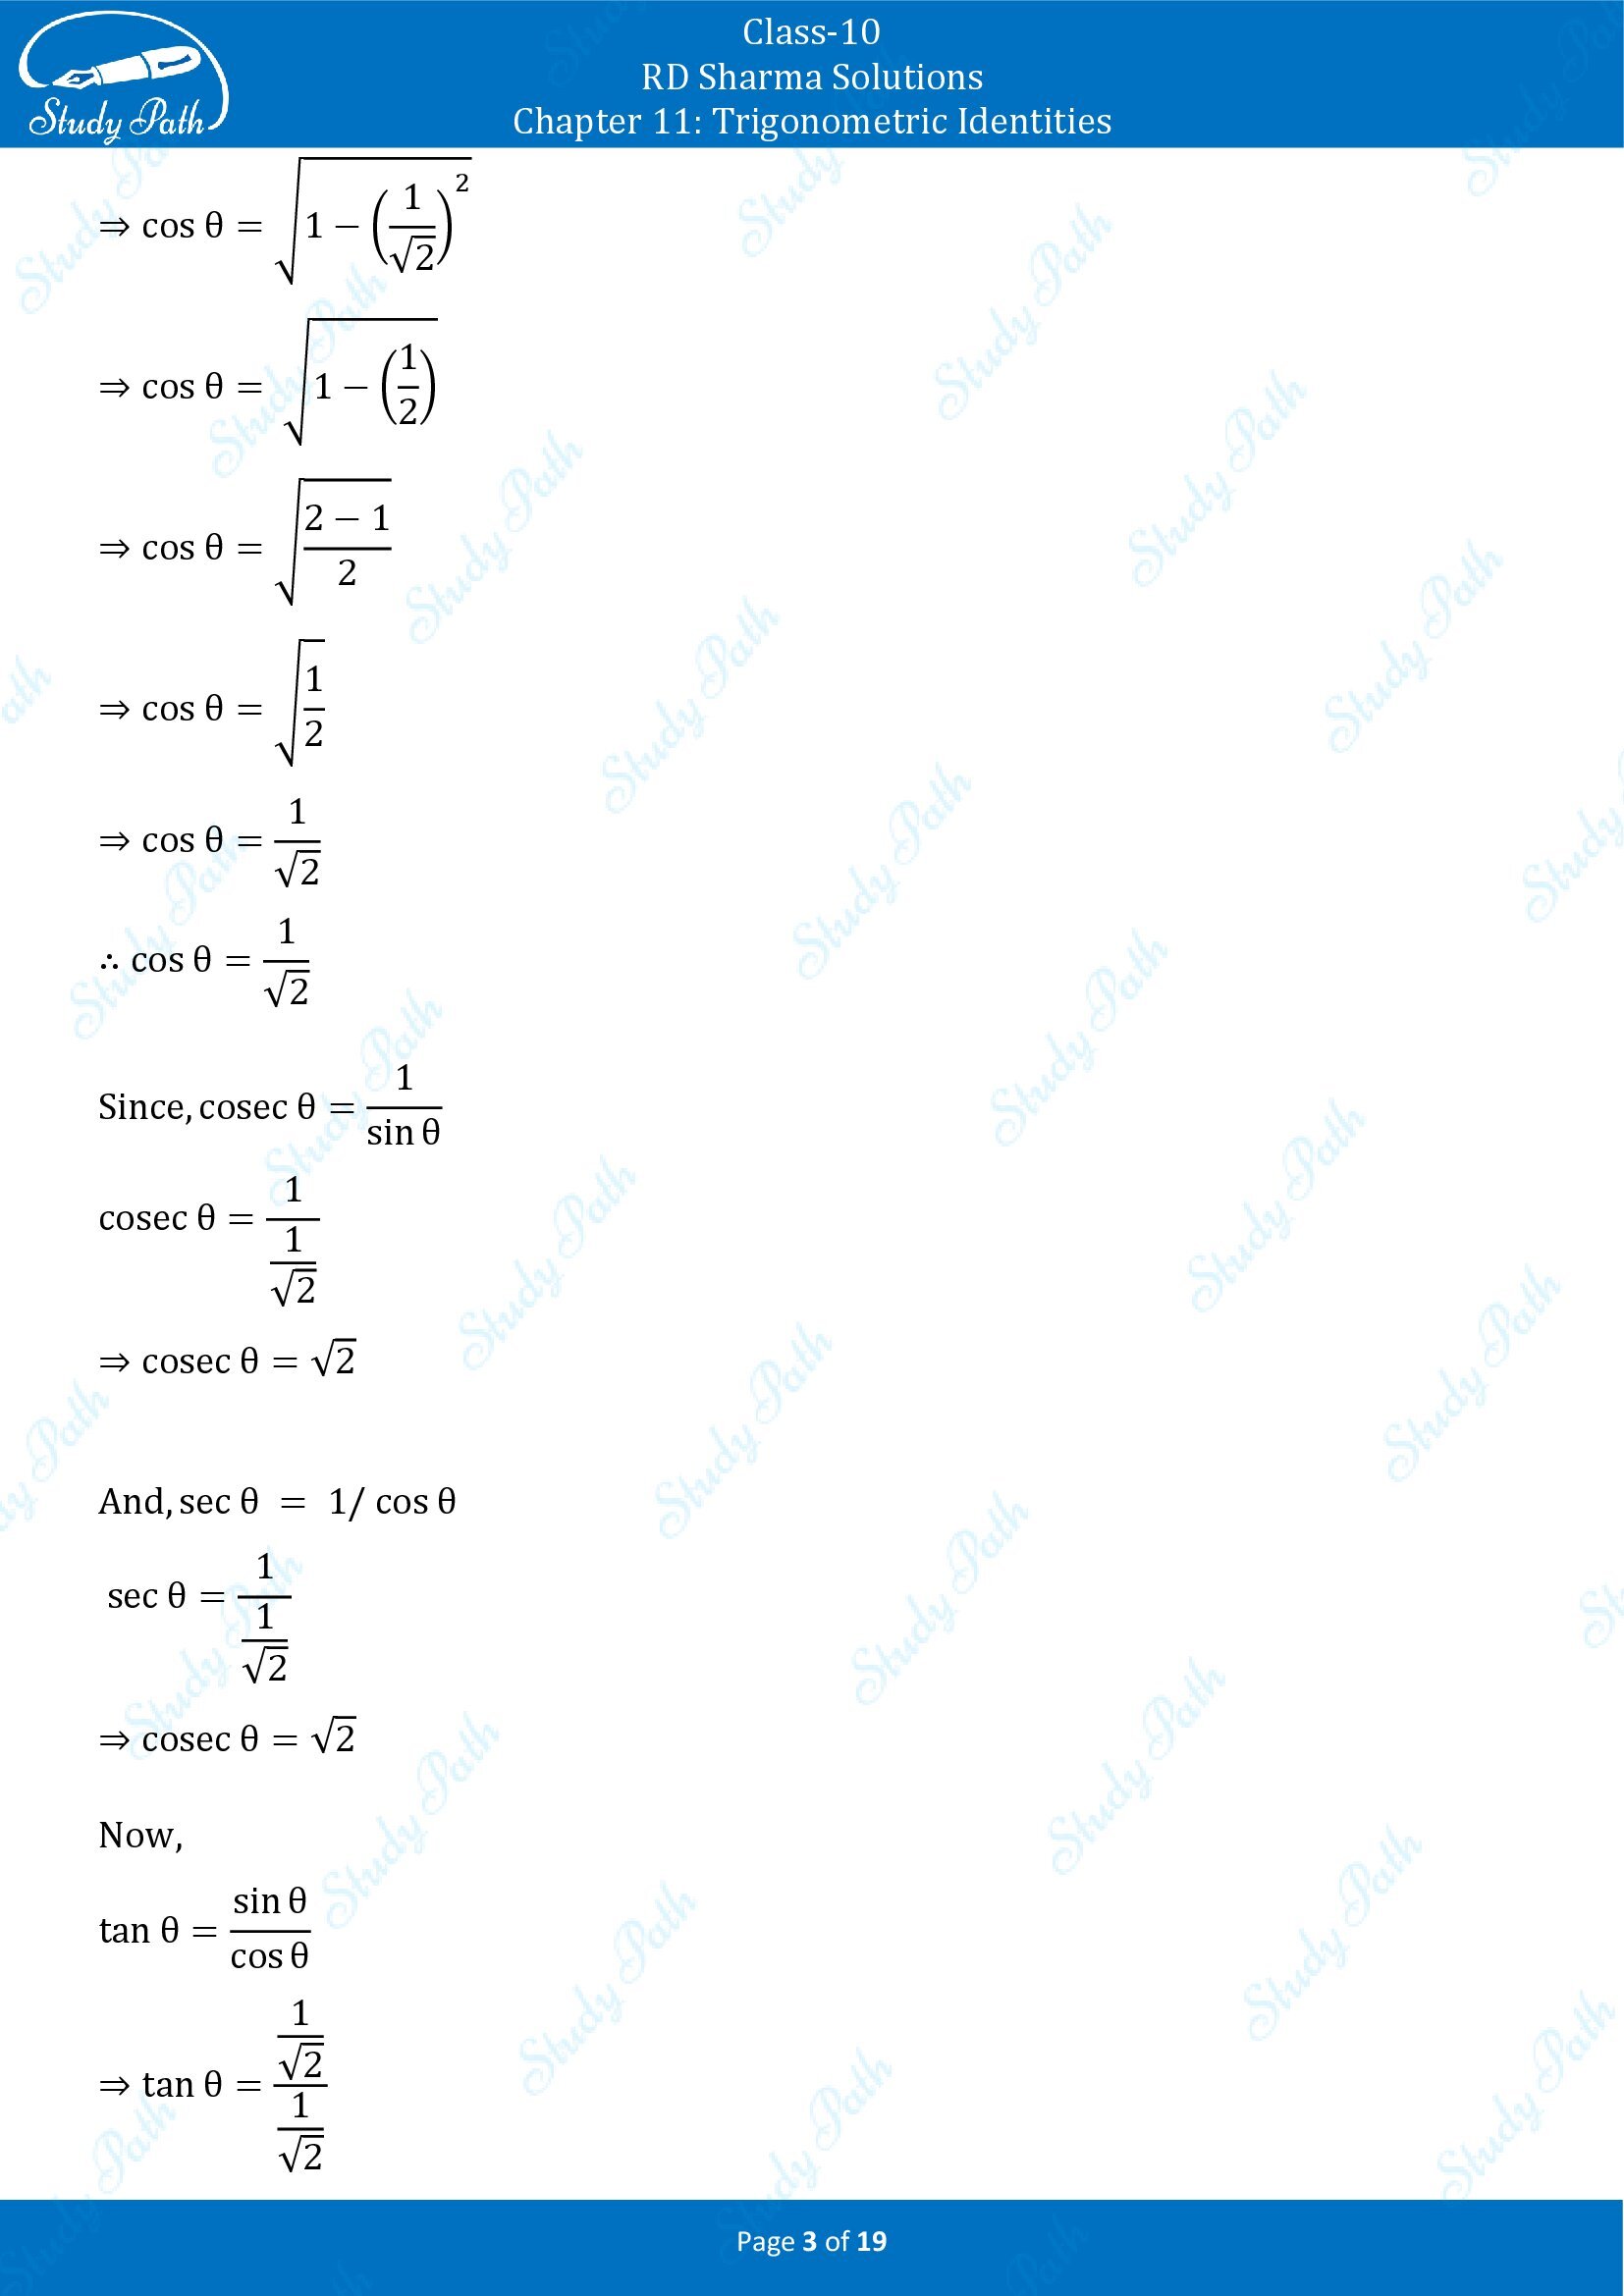 RD Sharma Solutions Class 10 Chapter 11 Trigonometric Identities Exercise 11.2 00003